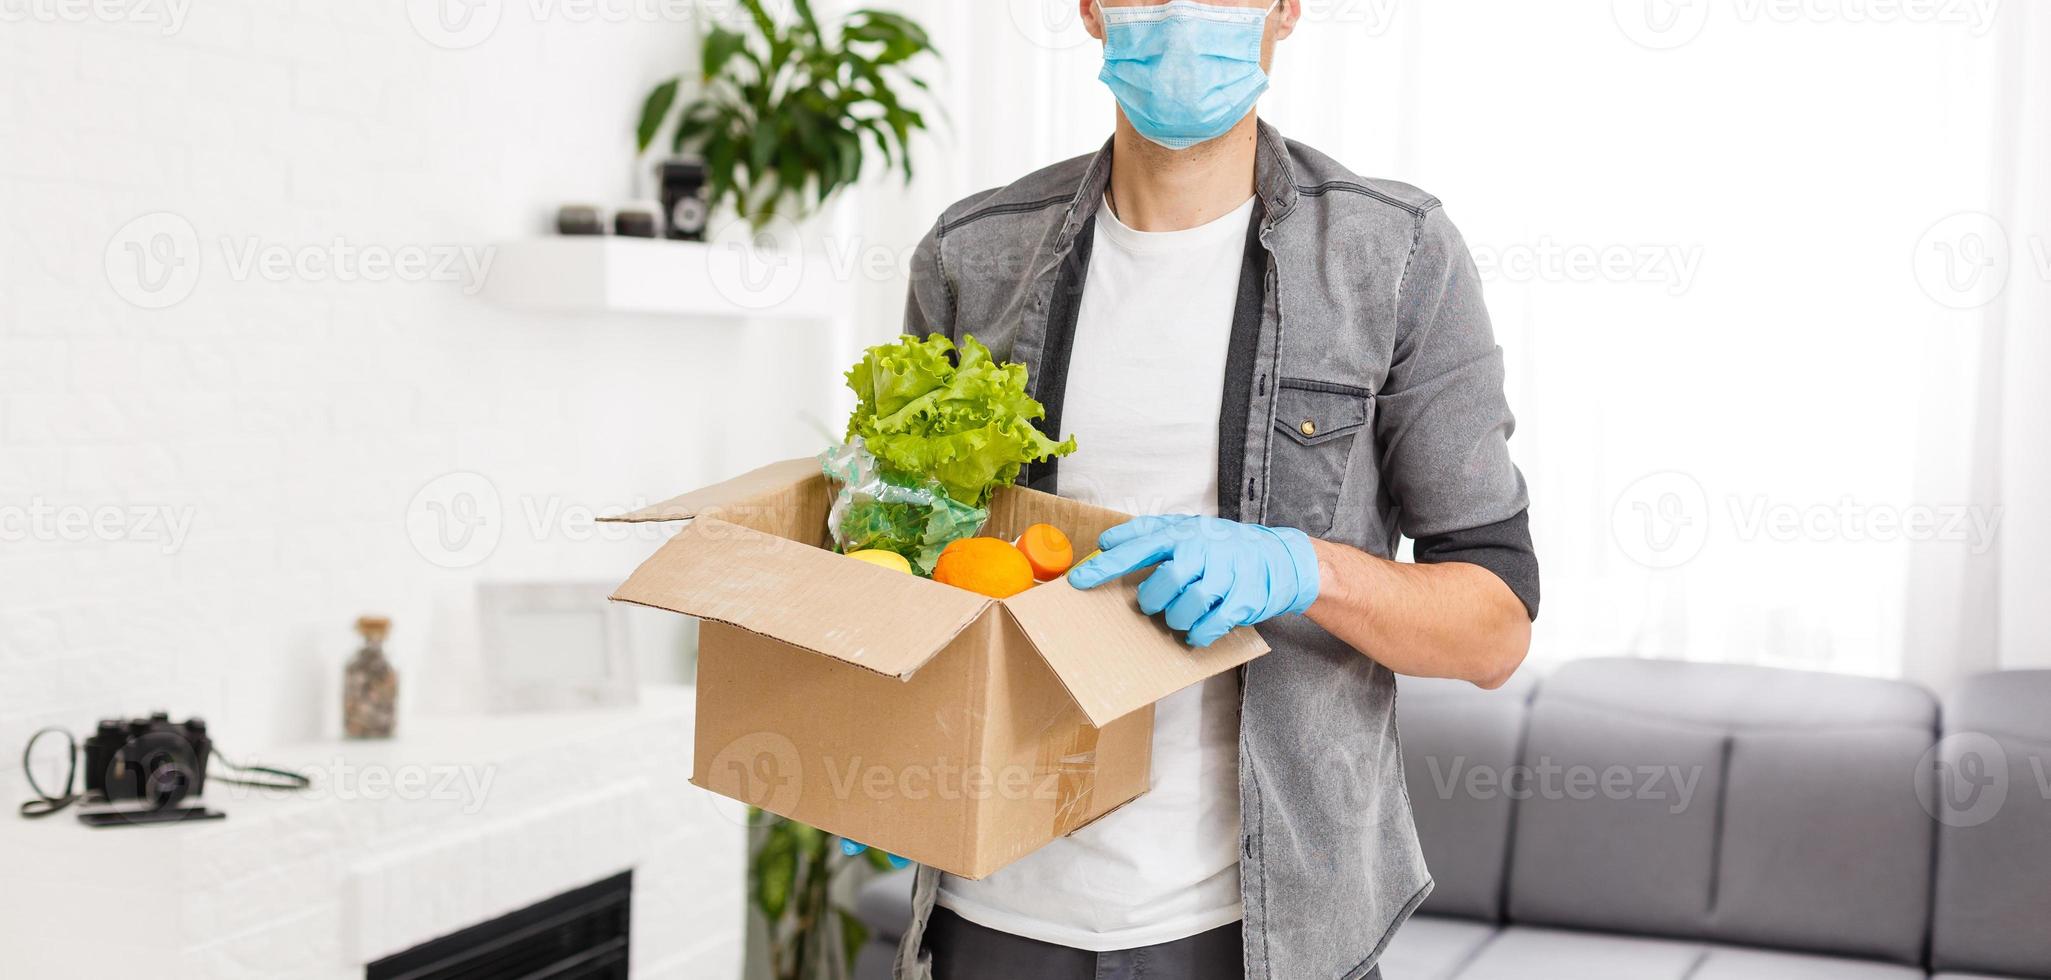 Man wearing medical face mask Disassembles food bags at home. quarantine. health concept. Corona Virus. order of products online. Delivering products to home. Delivery service photo